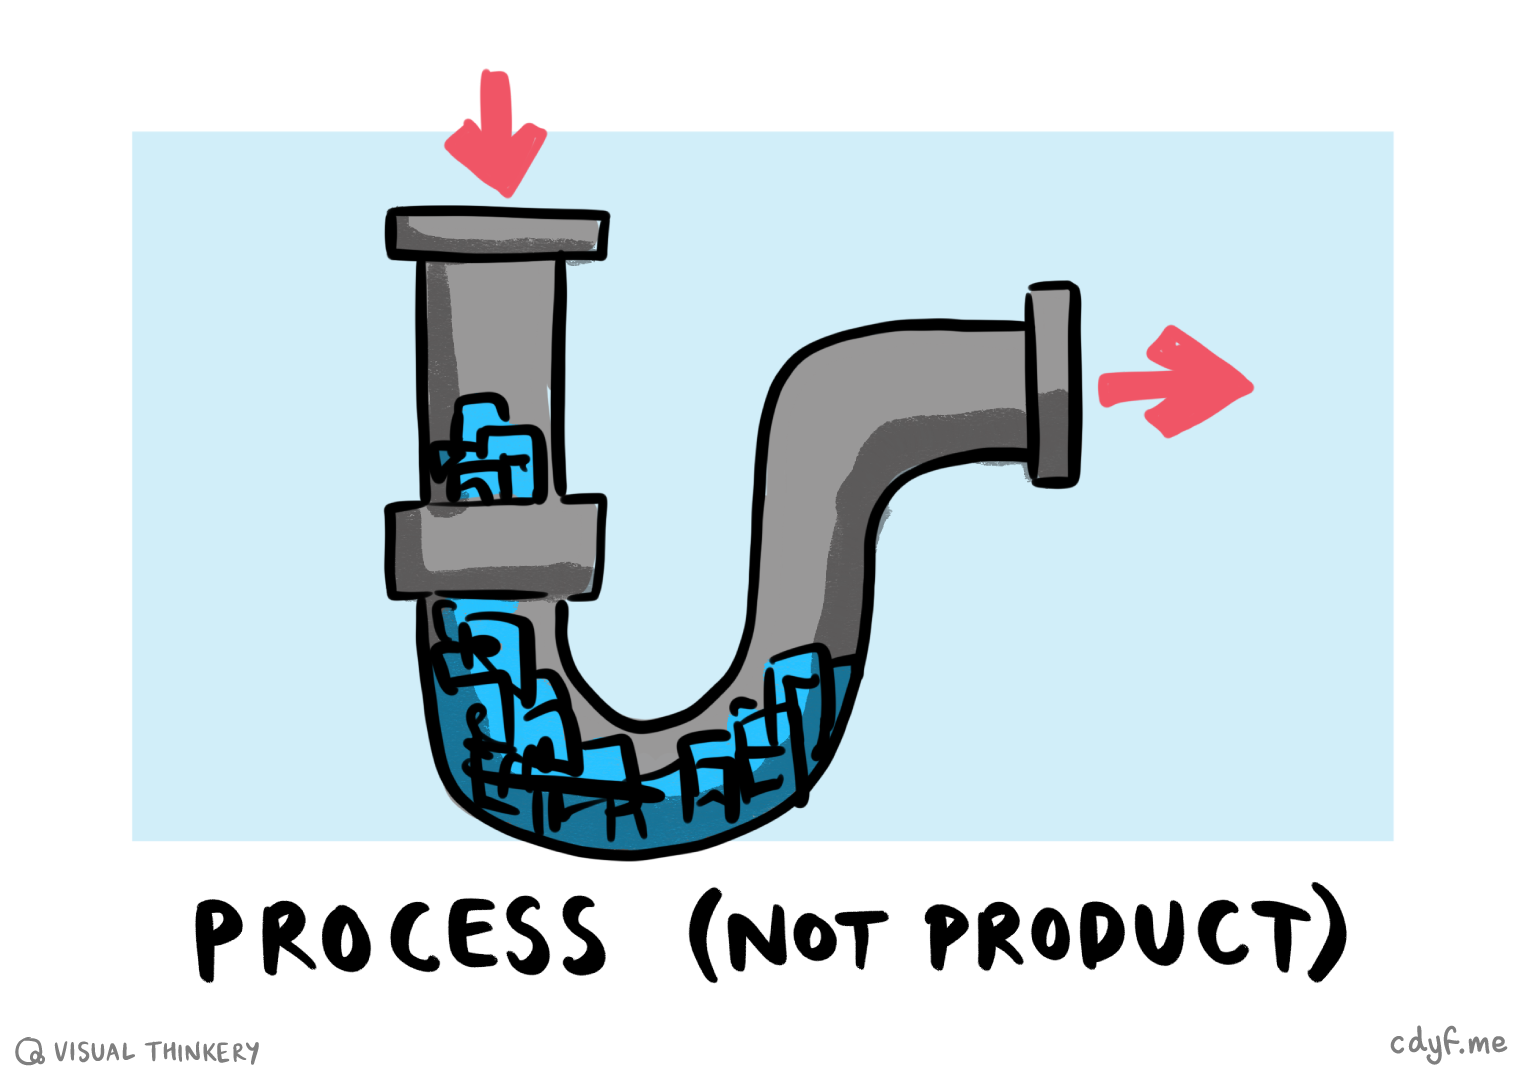 Sometimes the process of writing (the blue bit) is more important than the product of writing (the red output). Process sketch by Visual Thinkery is licensed under CC-BY-ND